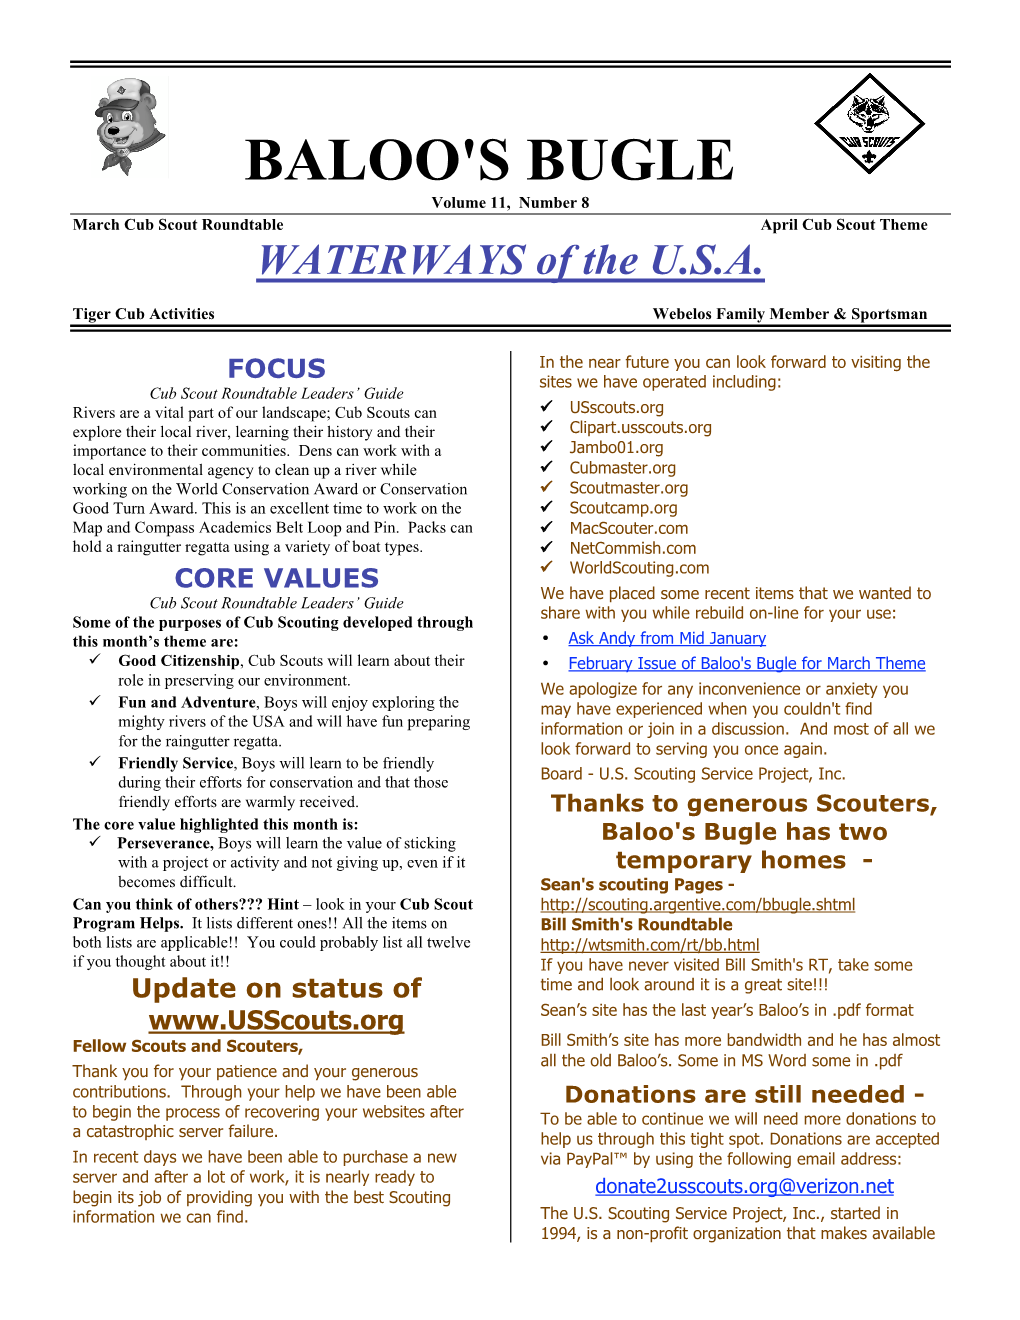 BALOO's BUGLE Volume 11, Number 8 March Cub Scout Roundtable April Cub Scout Theme WATERWAYS of the U.S.A